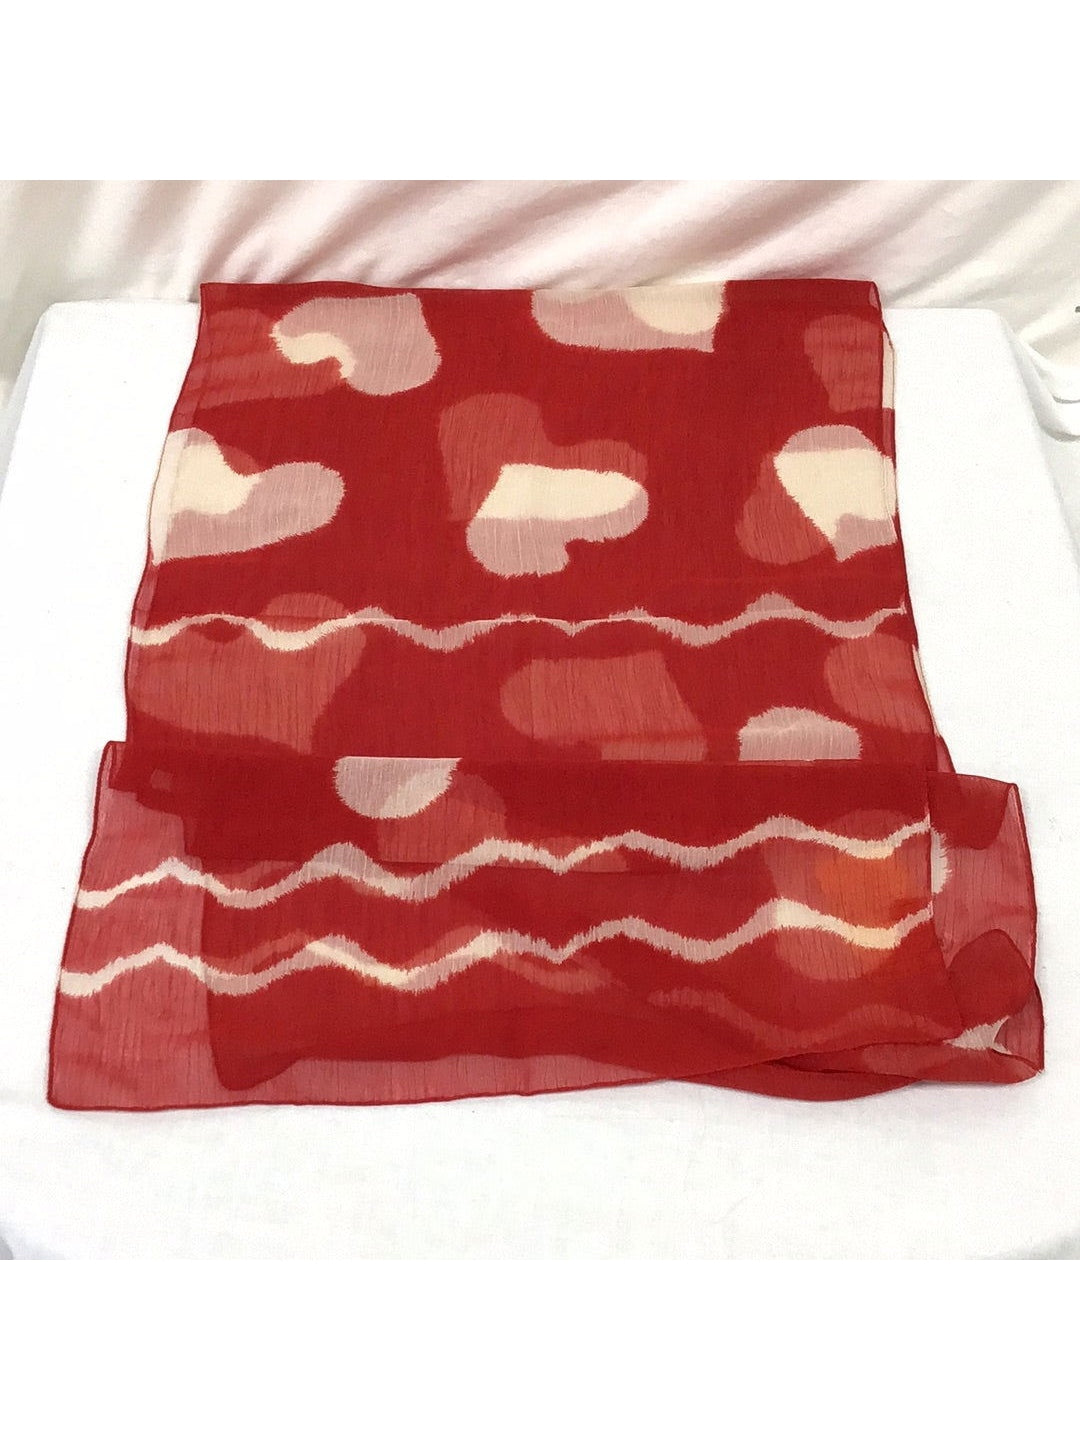 Ladies Red Scarf with White Hearts Print - The Kennedy Collective Thrift - 